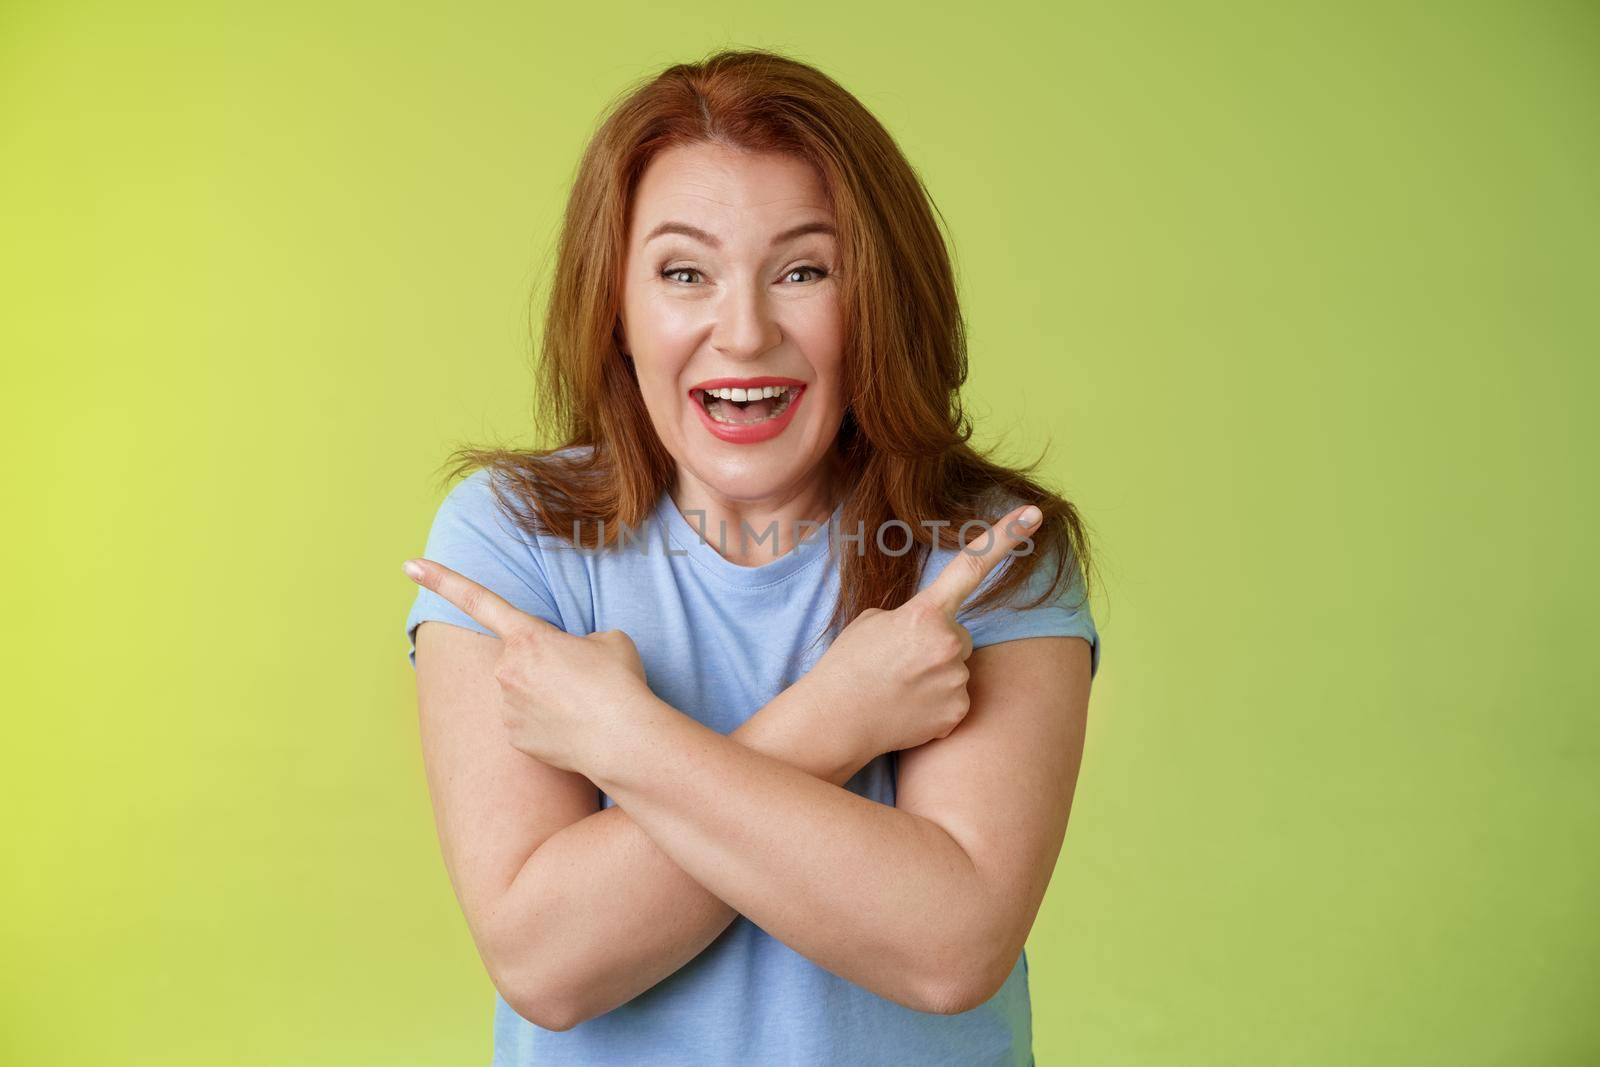 Lifestyle Concept - Happy carefree entushiastic redhead funny mature female. having fun positive attitude cross arms body pointing sideways show left right products laughing happily like both choices green background.